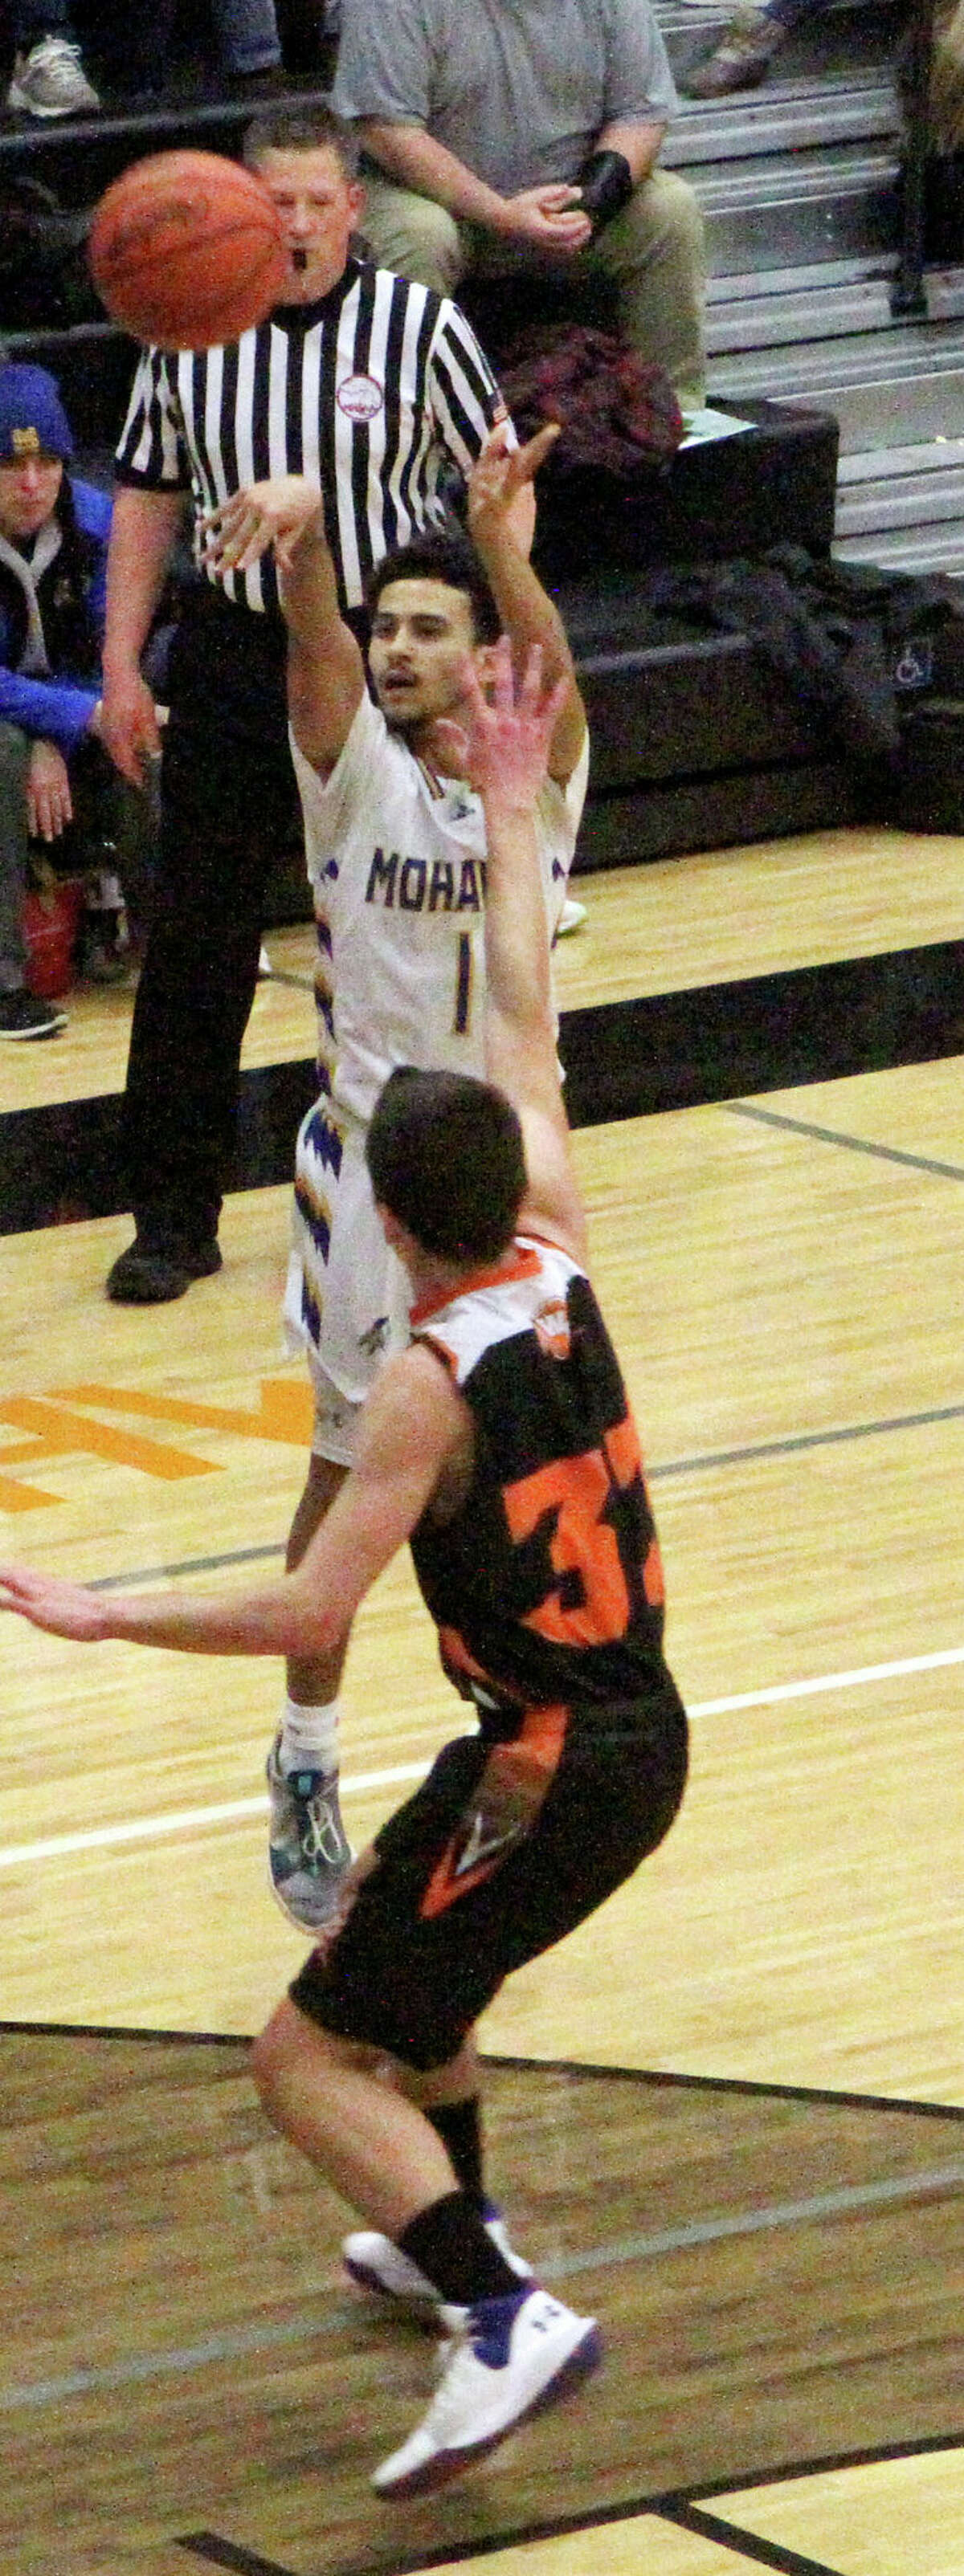 The Morley Stanwood boys basketball team defeated White Cloud 48-44 in Monday night's District 74 first round game.